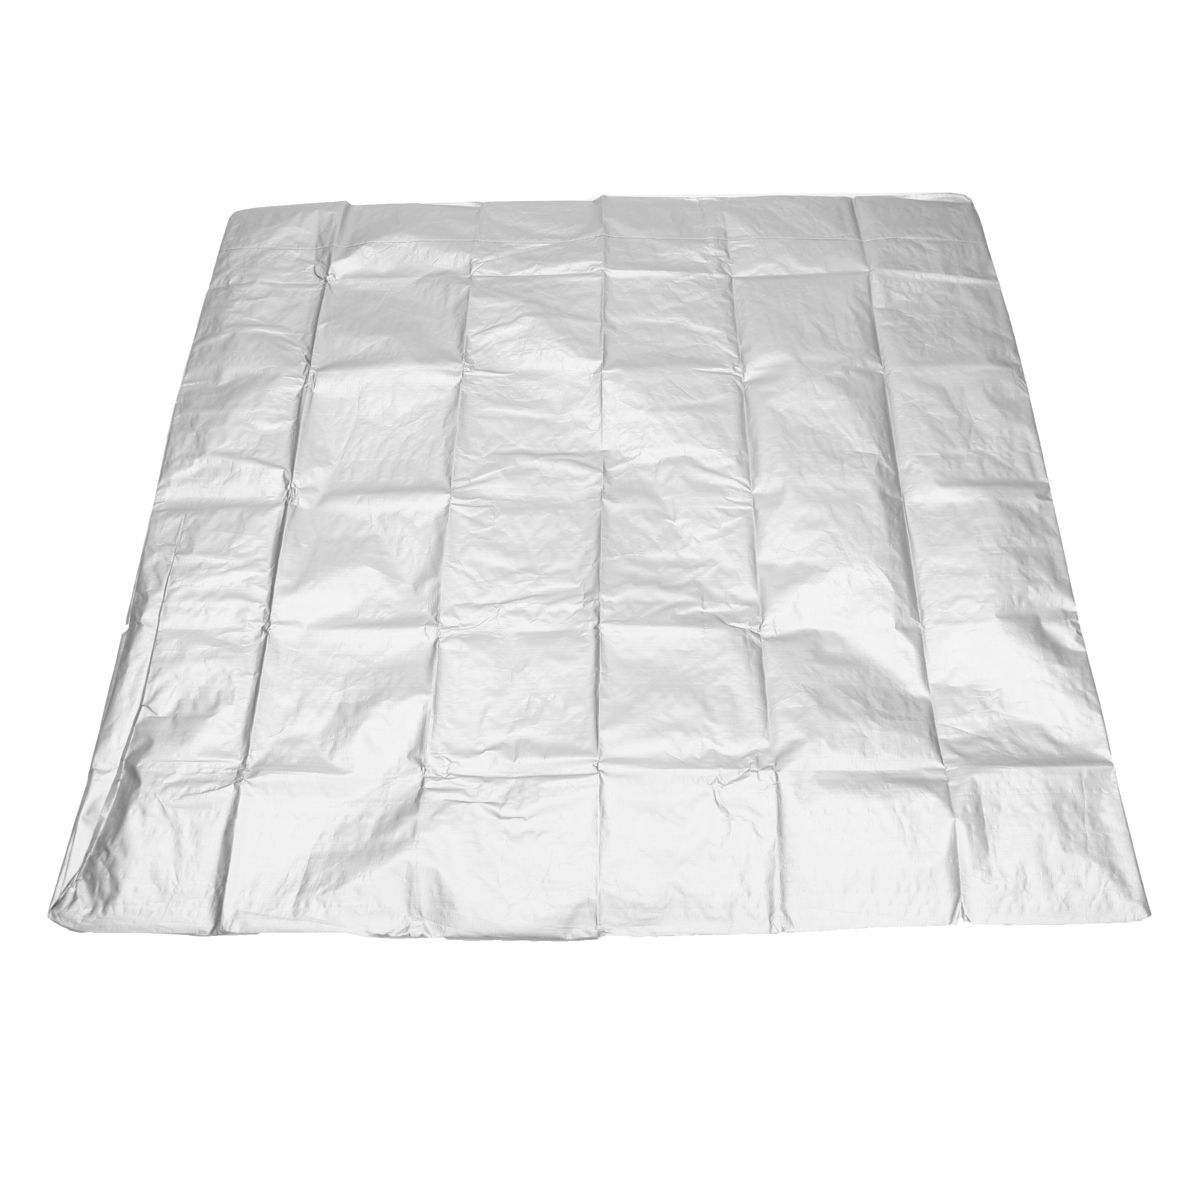 3-Style-Large-Durable-UV-Proof-Spa-Outdoor-Bathtub-Hot-Tub-Cover-Guard-Dust-Cap-1326455